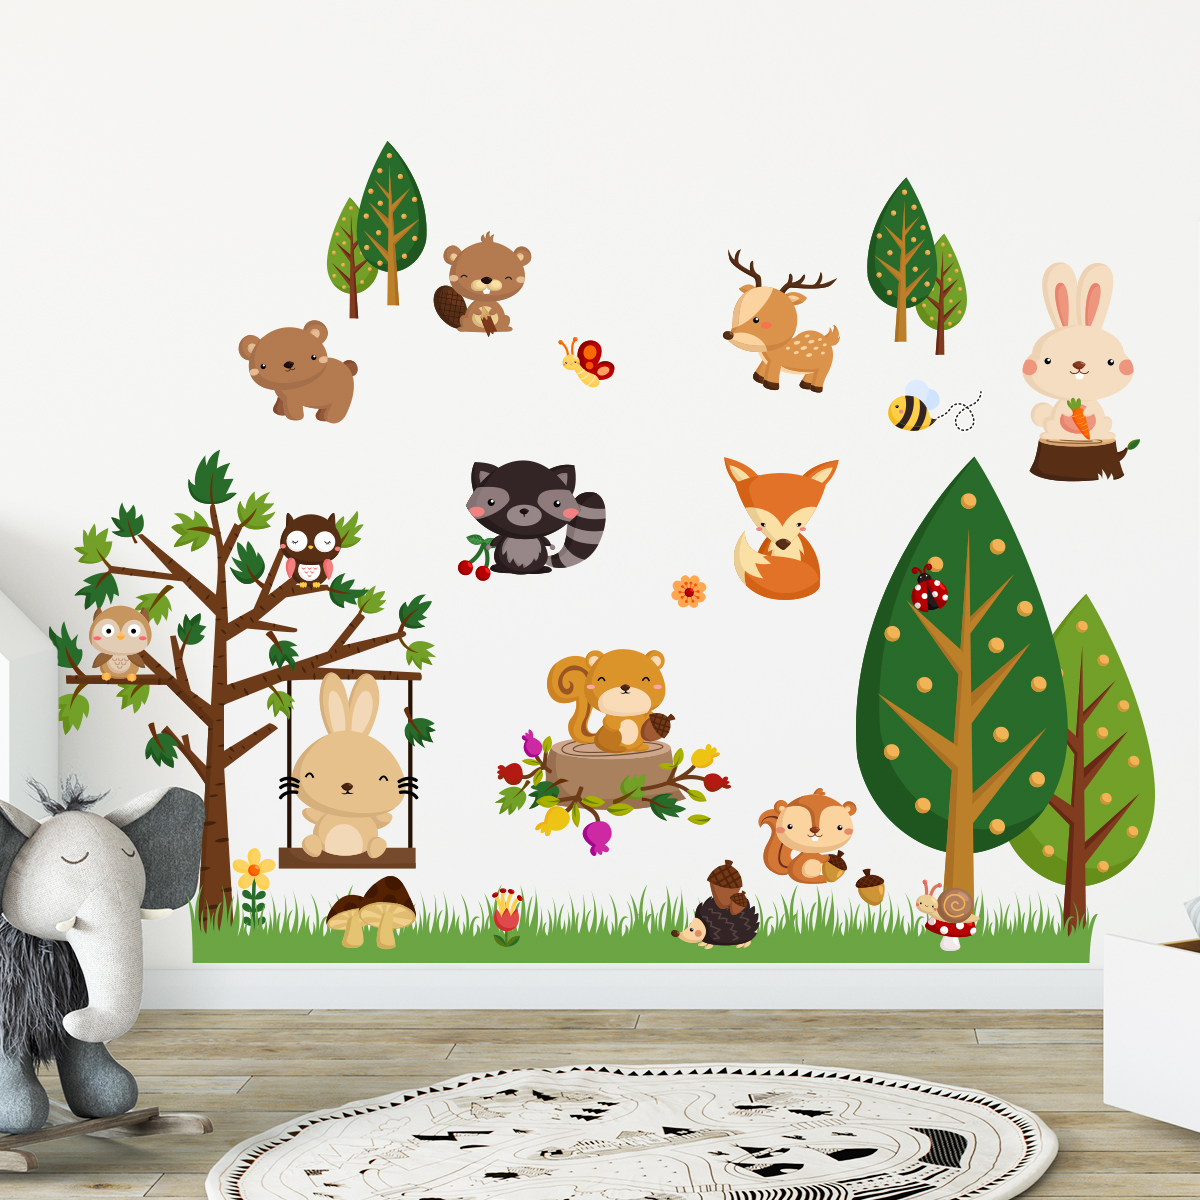 Wall Decal The Animals Of The Forest Wall Decals Wall Decal Nature Trees Ambiance Sticker